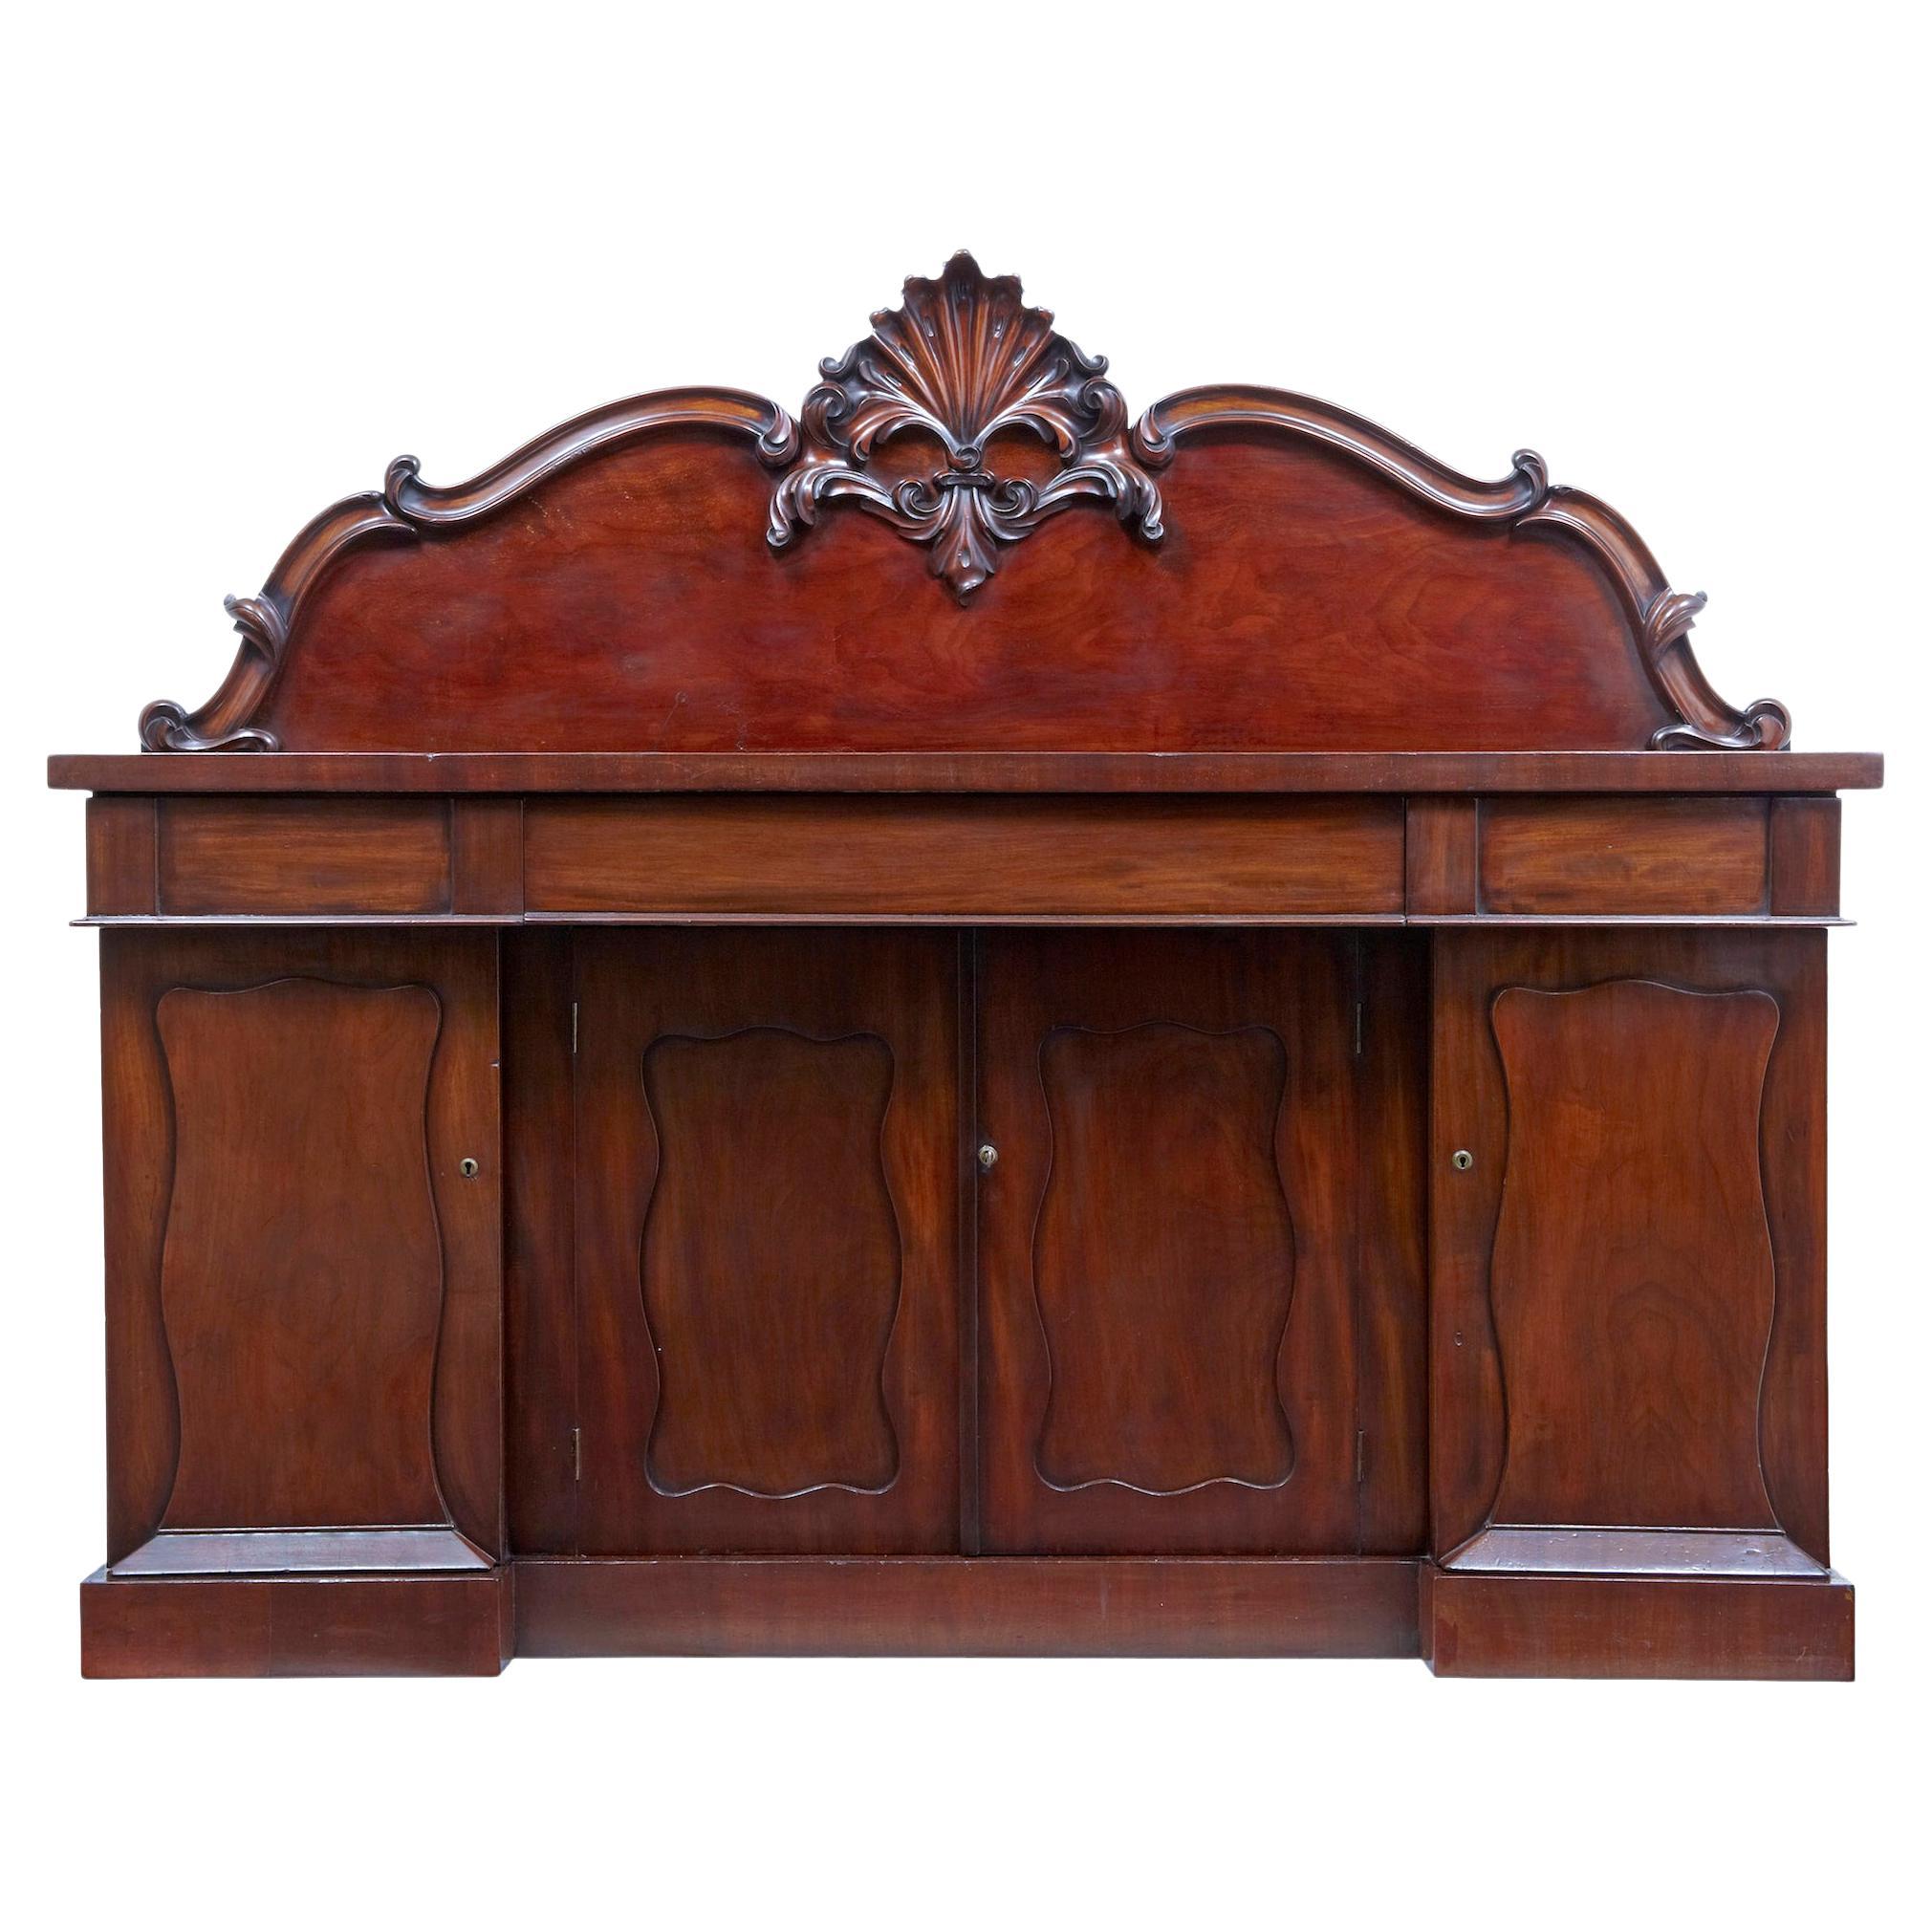 19th Century William IV Carved Mahogany Sideboard